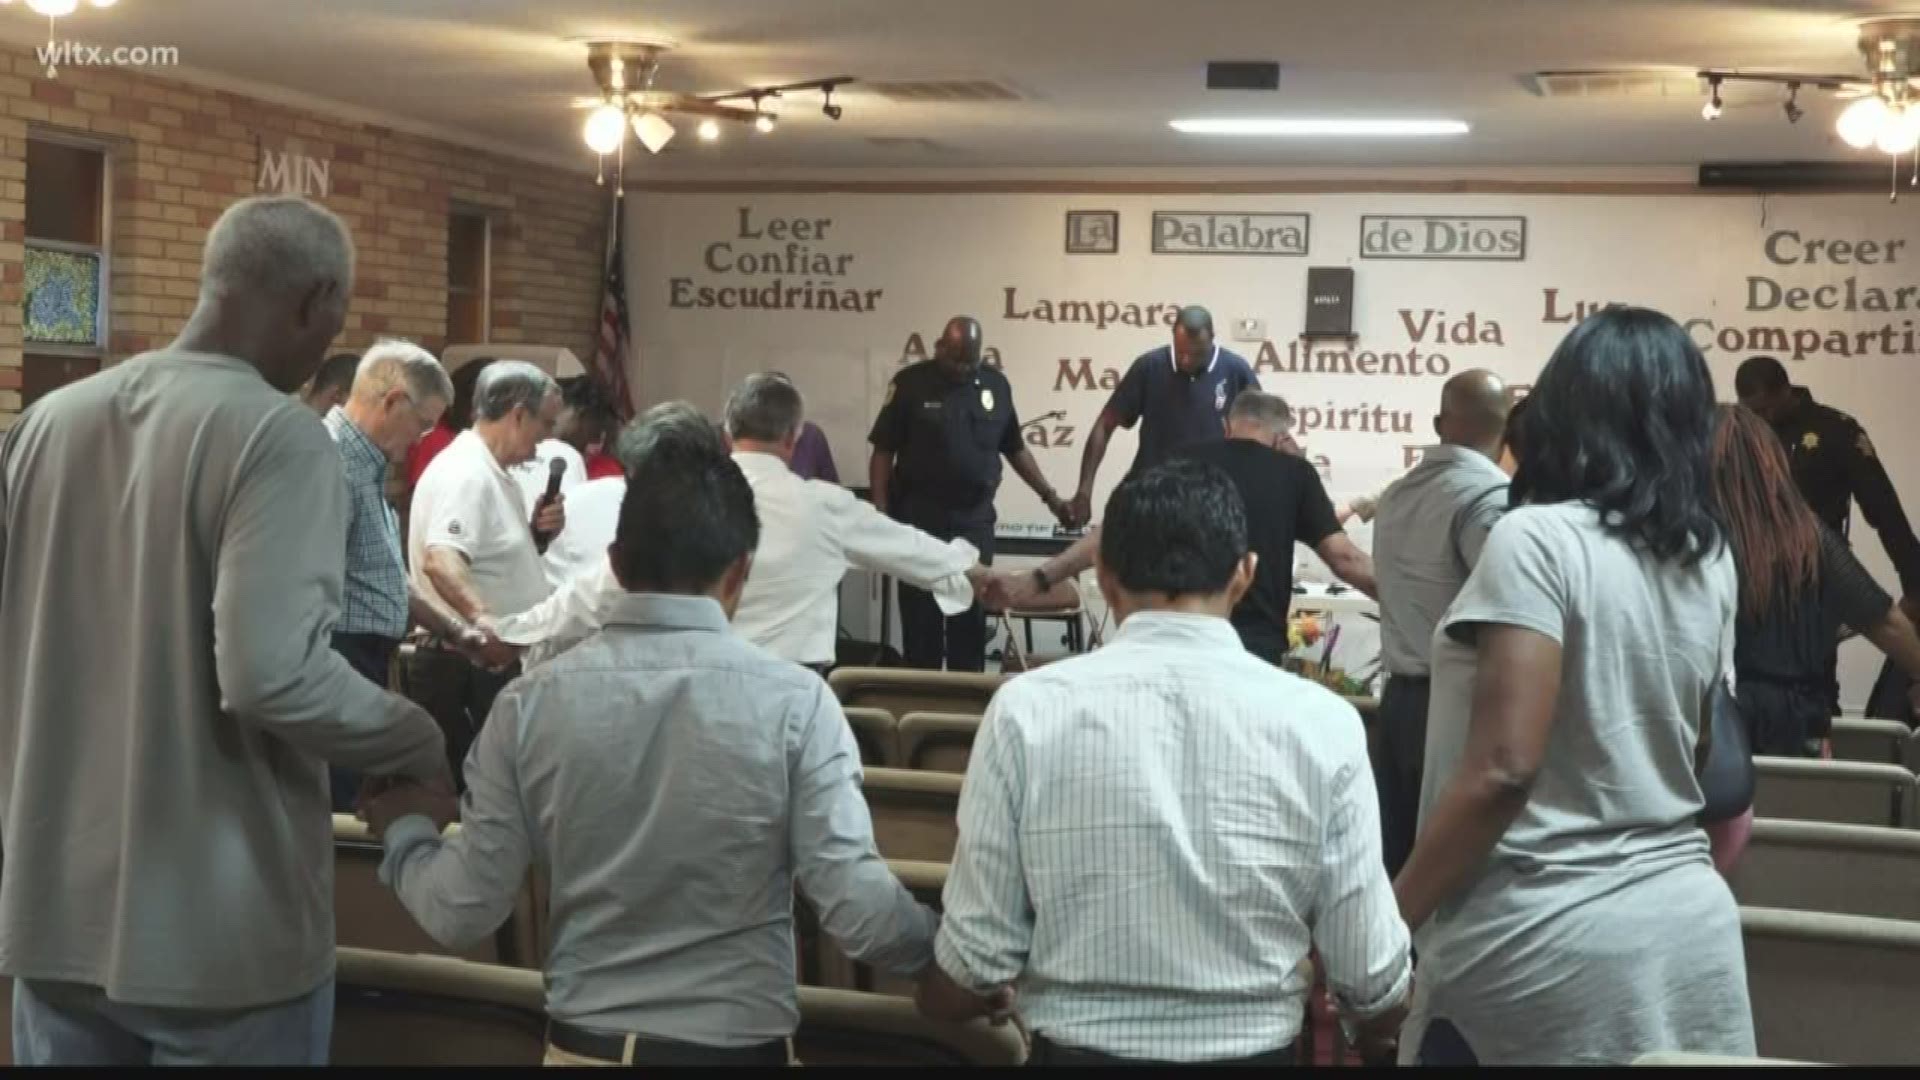 On August 25th, the Centro Cristiano de Columbia church saw gun violence first-hand after a man entered the church and opened fire during a Sunday morning service.